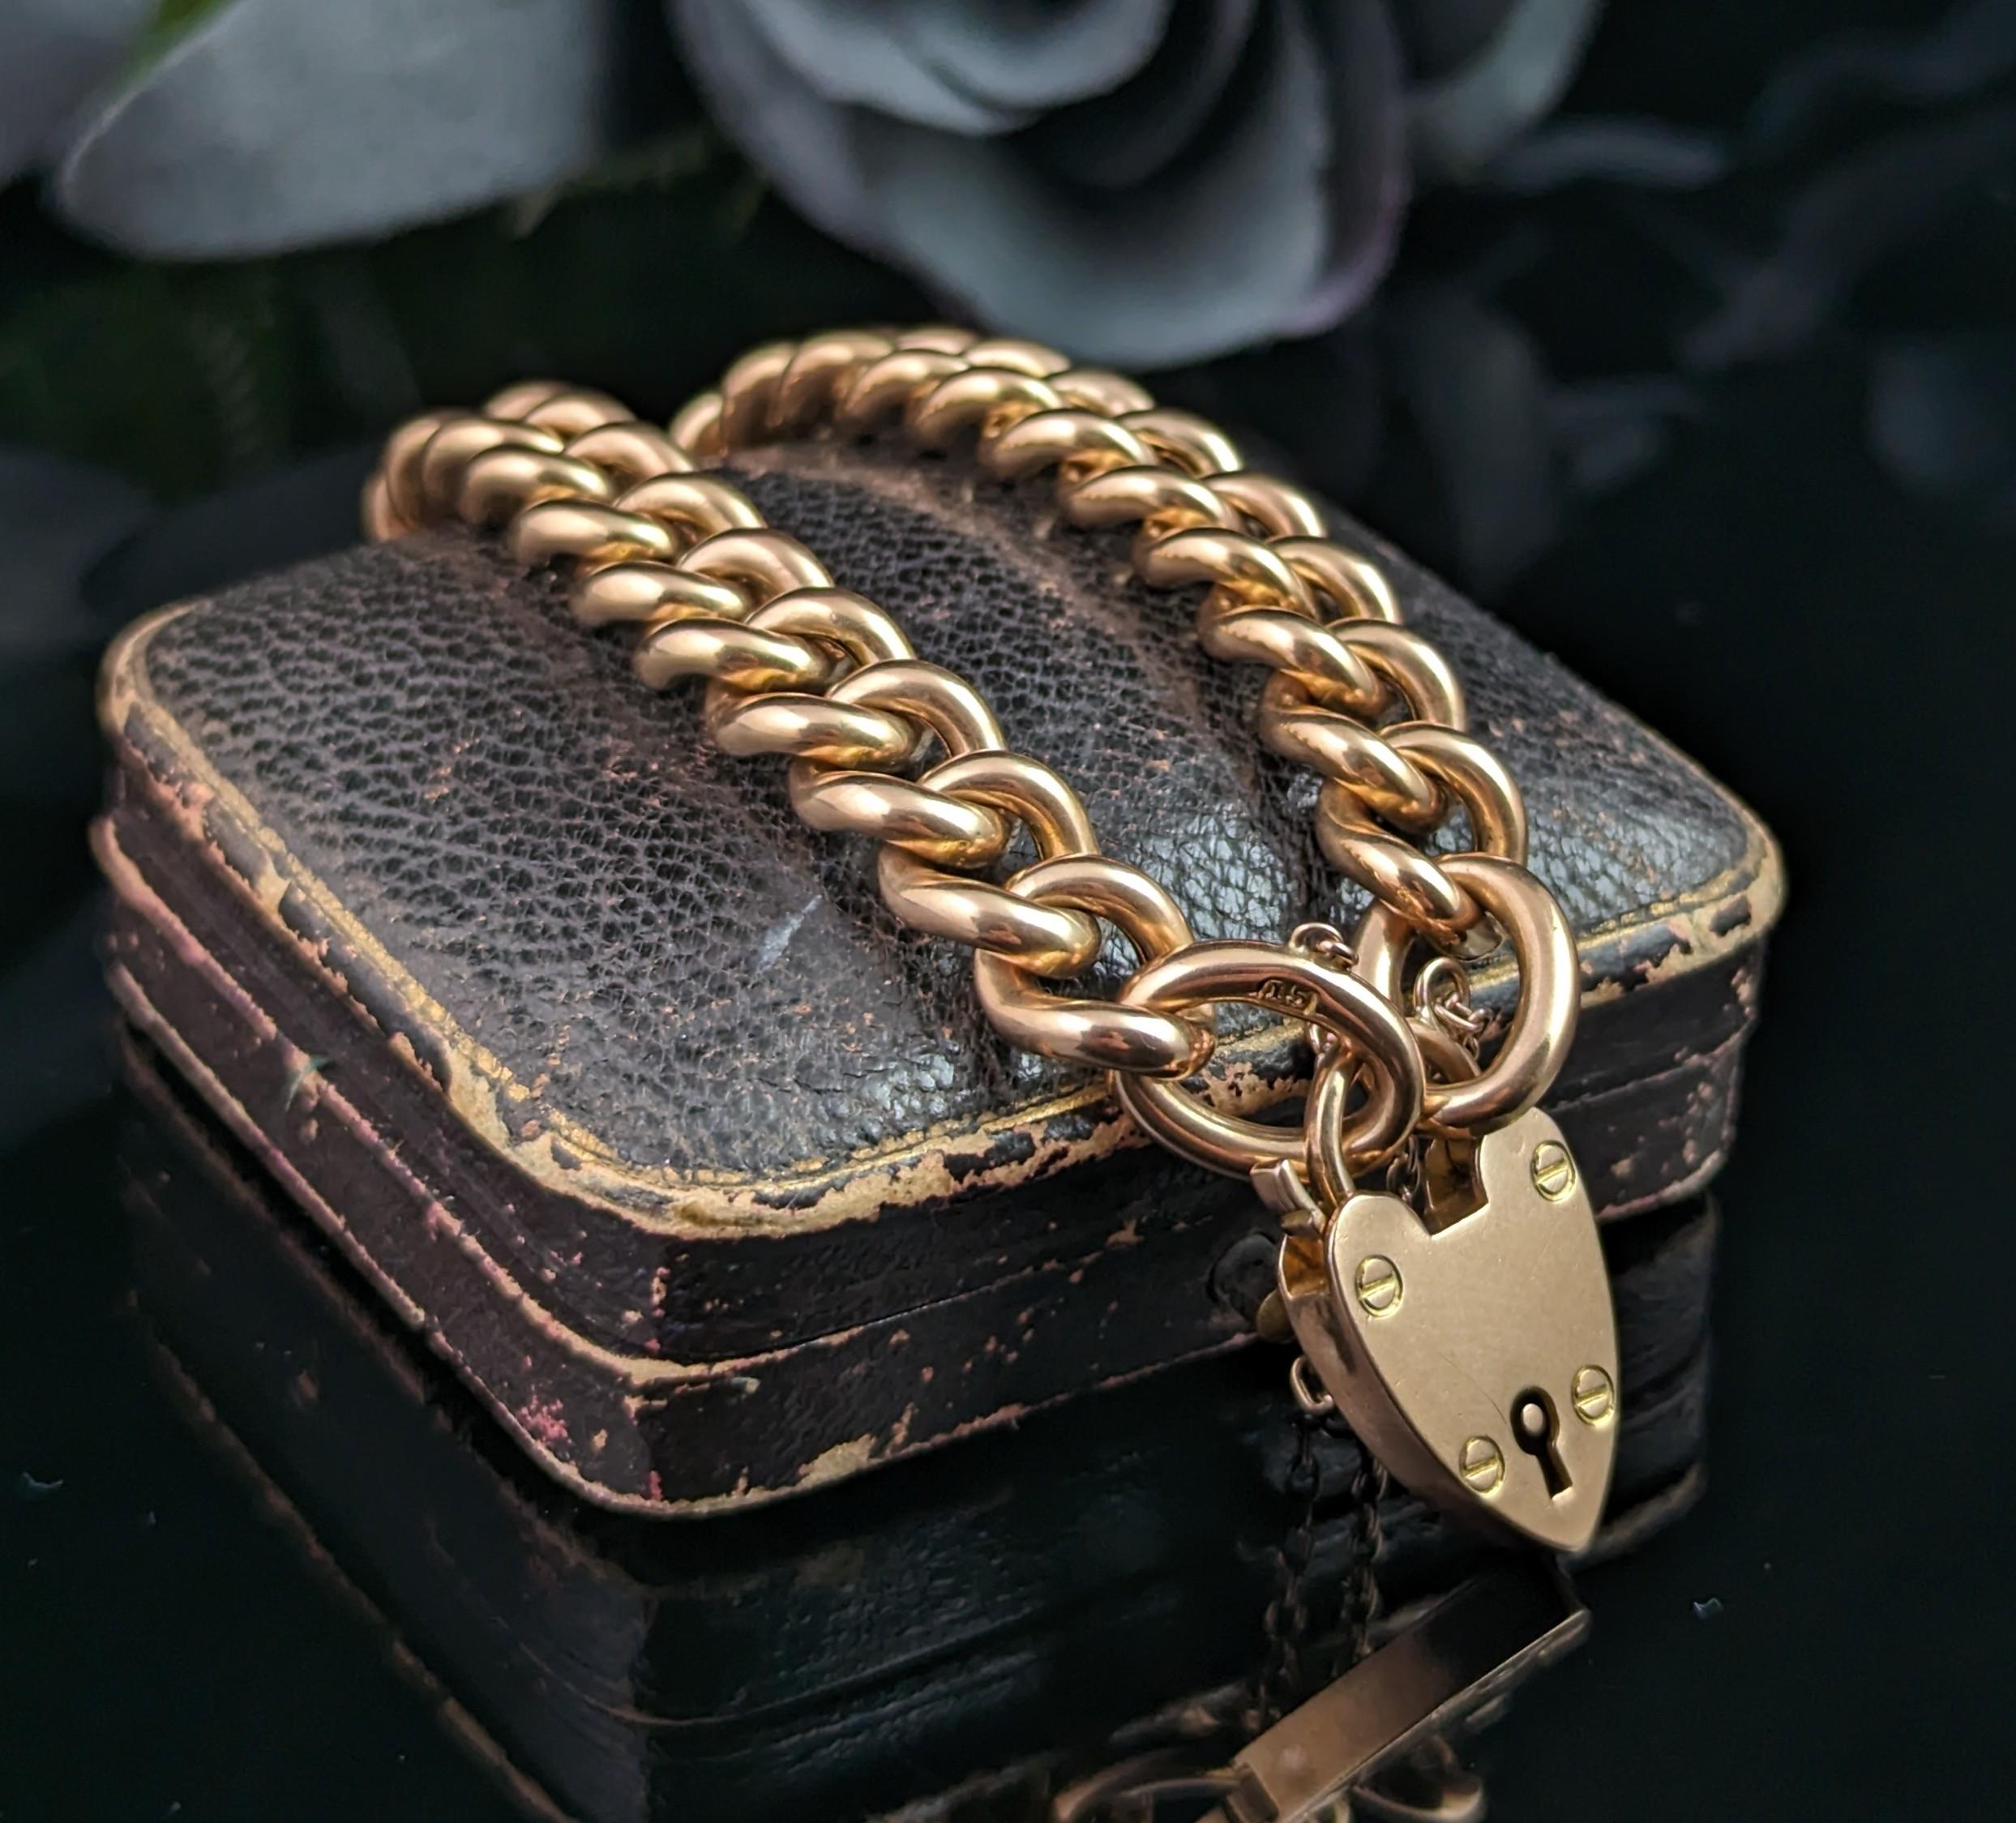 Ooh now let me start off by saying that I'm totally biased on this piece because a good antique gold curb bracelet is absolutely one of my favourite pieces.

Classic, timeless, rich, chunky, the Victorians were well ahead of their time with many